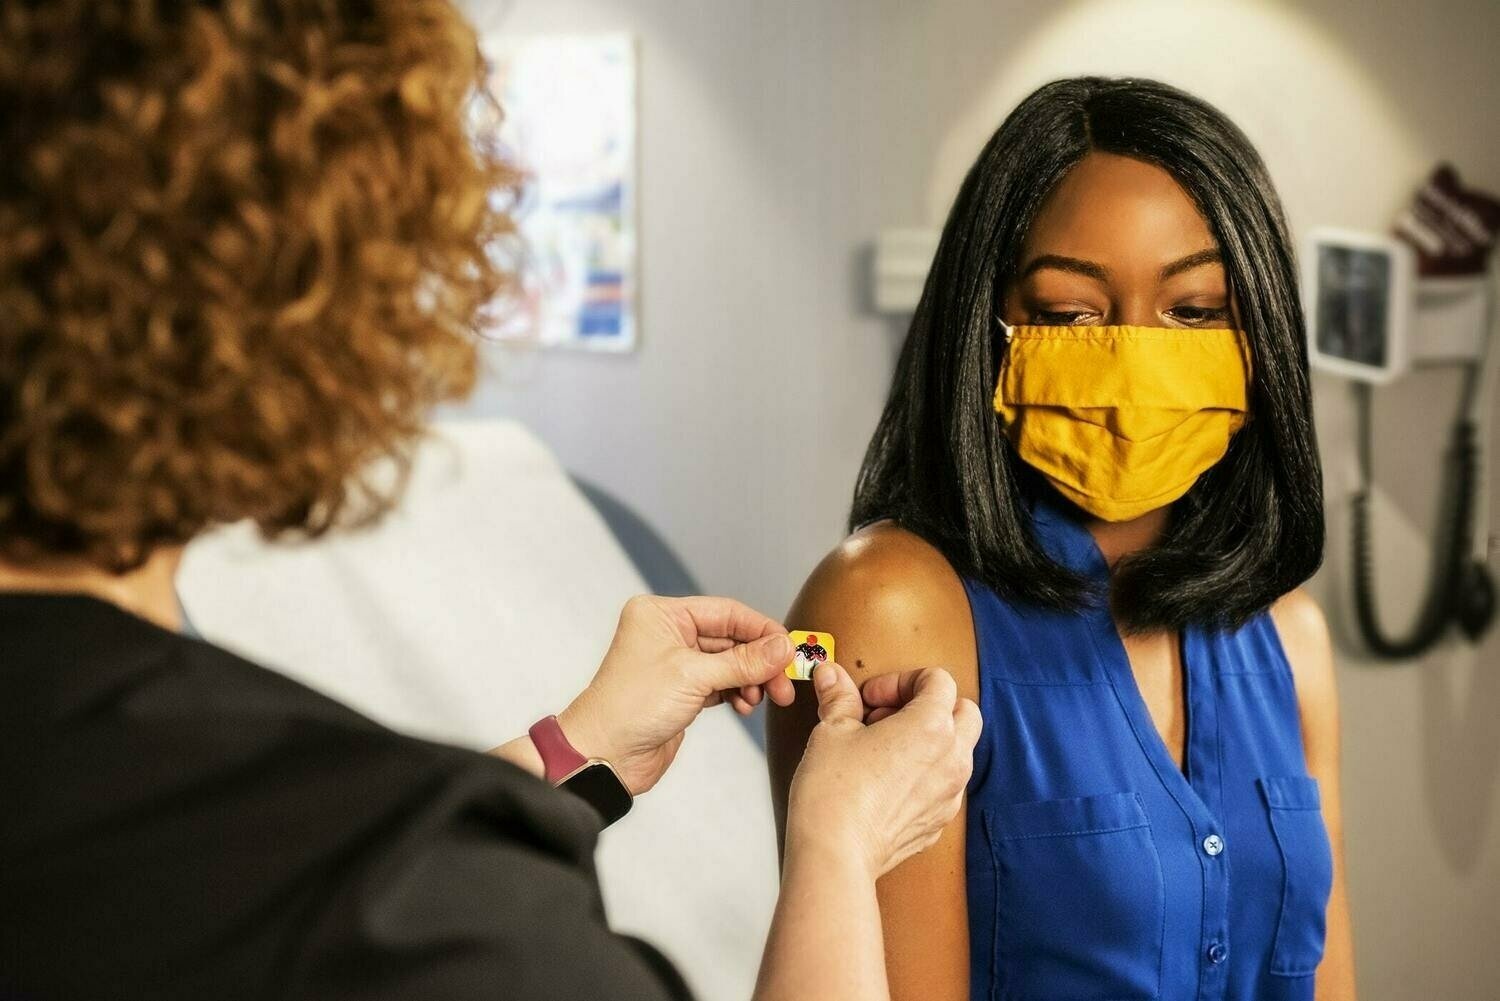 Should we mandate vaccines in the workplace?